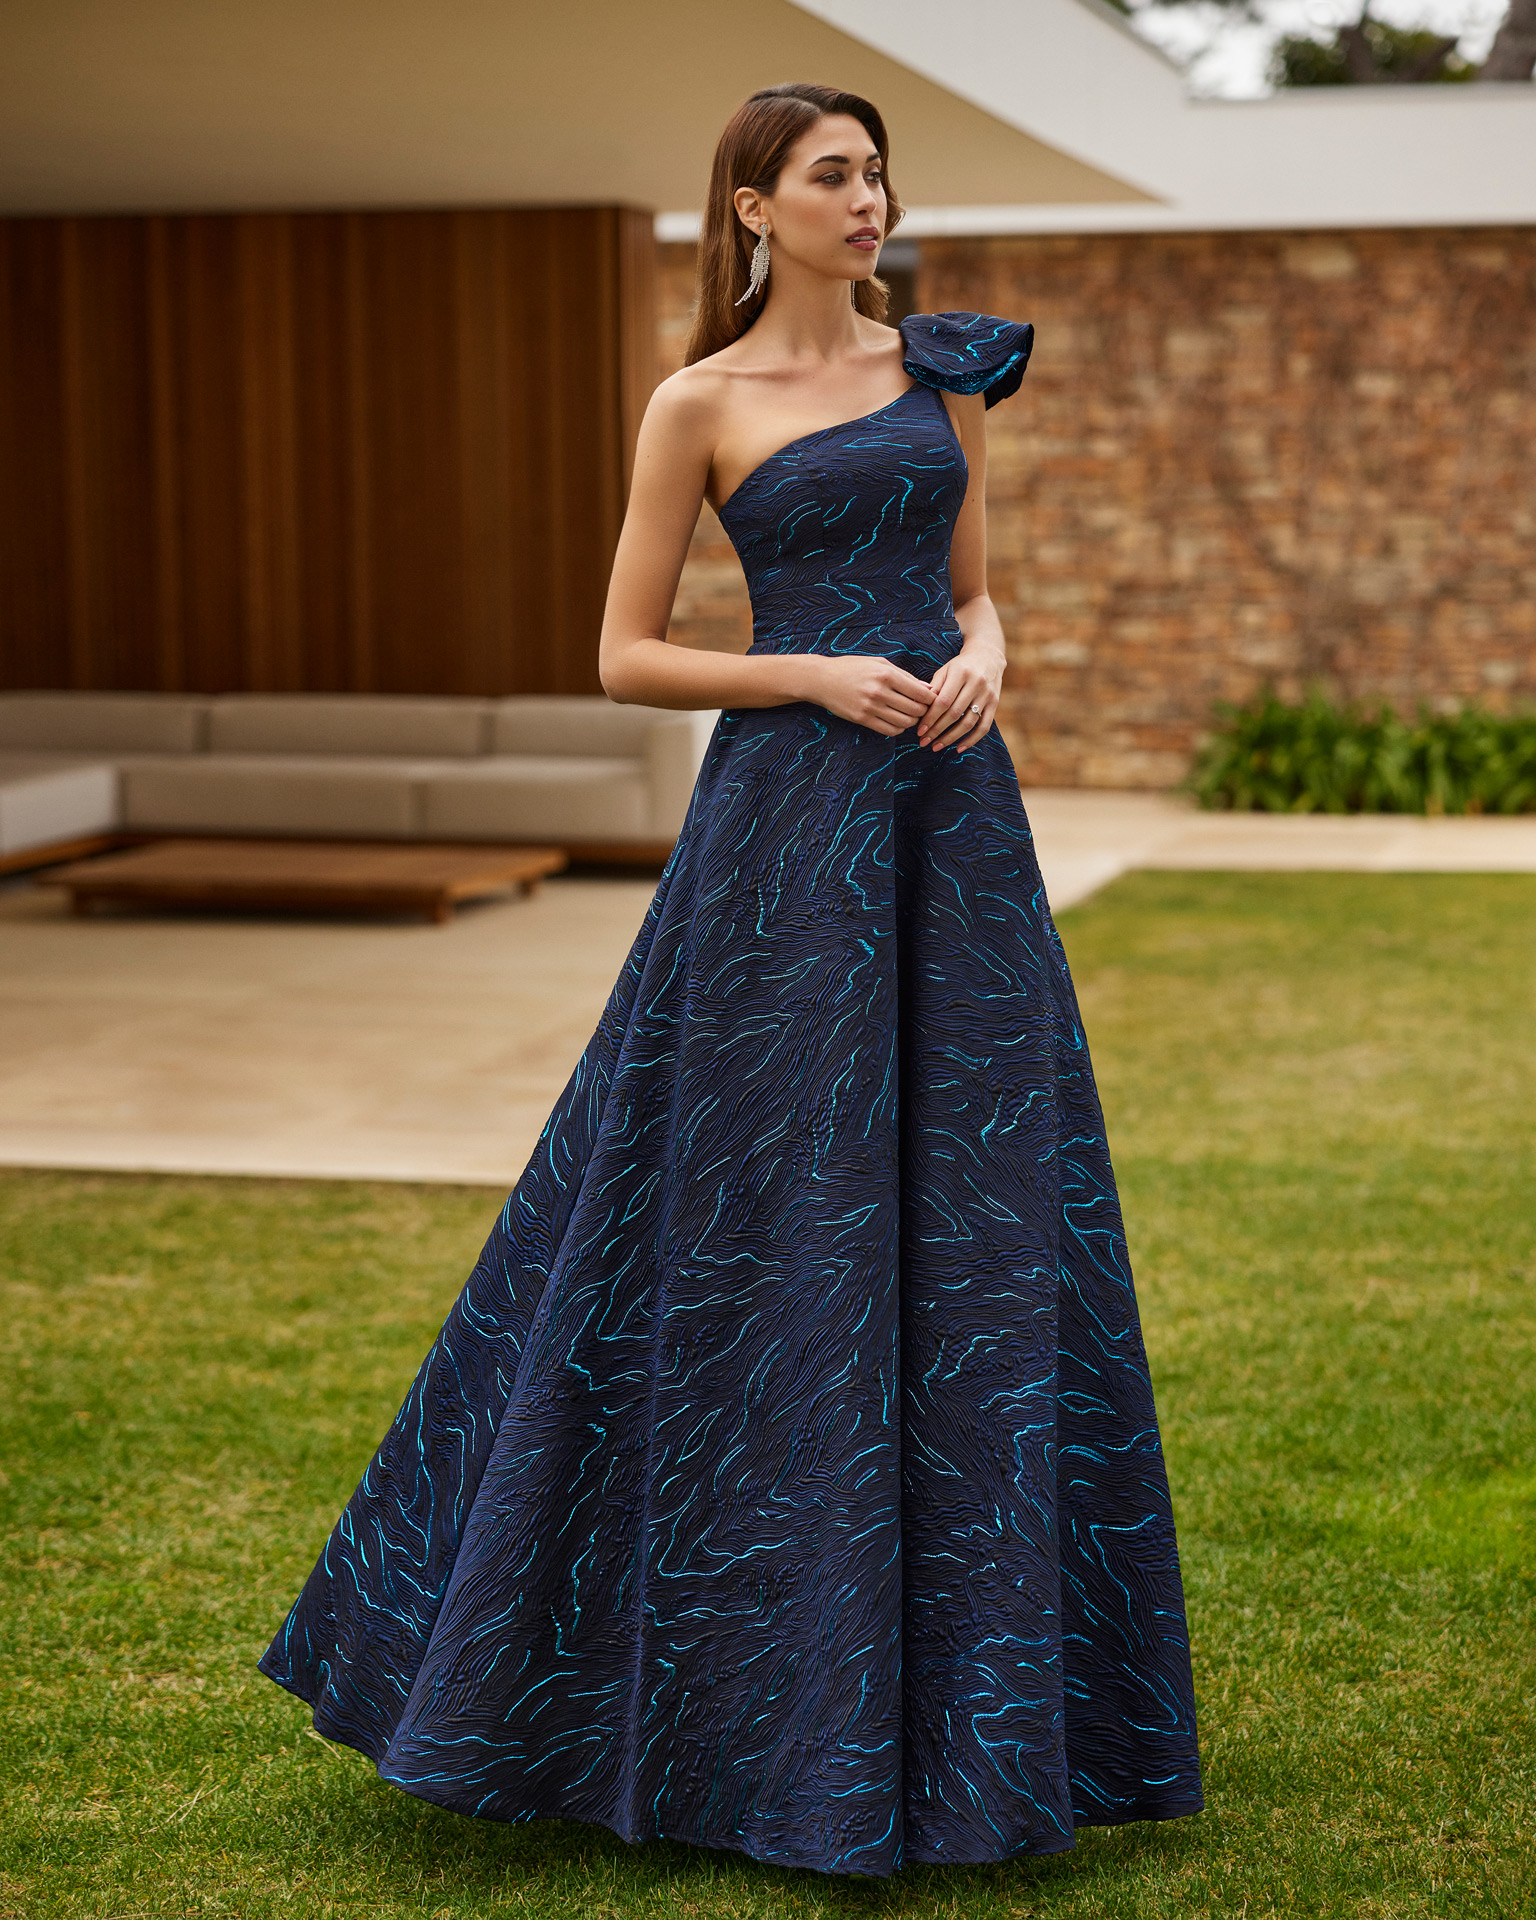 Elegant long evening dress. Made with brocade. With asymmetrical neckline. Exclusive Marfil Barcelona look. MARFIL_BARCELONA.